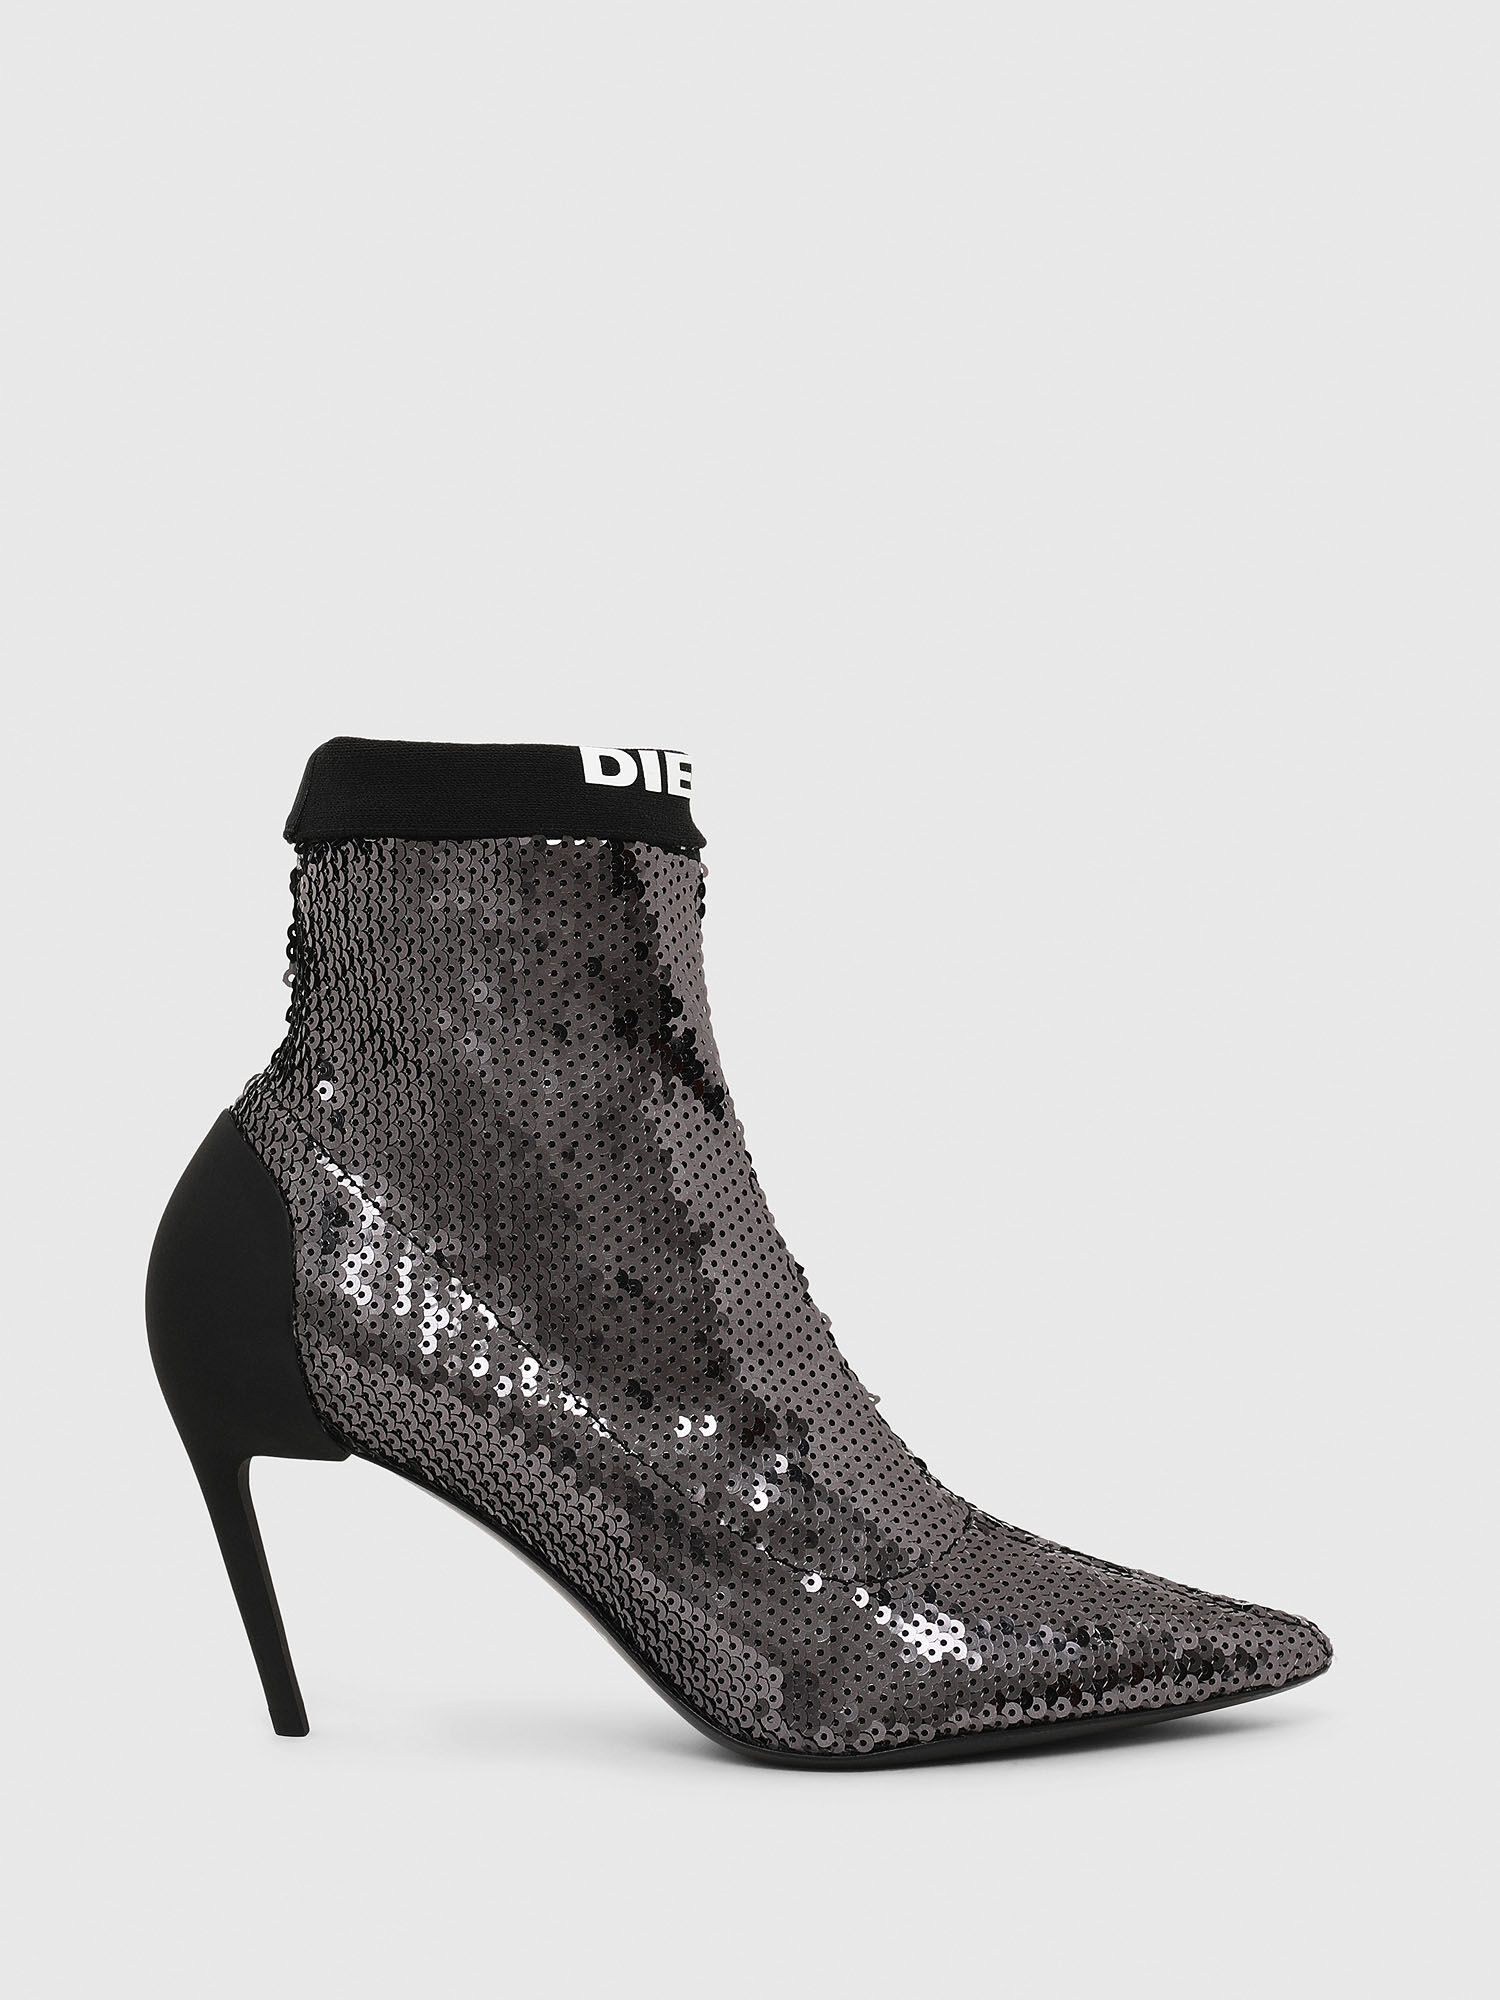 silver ankle boots uk